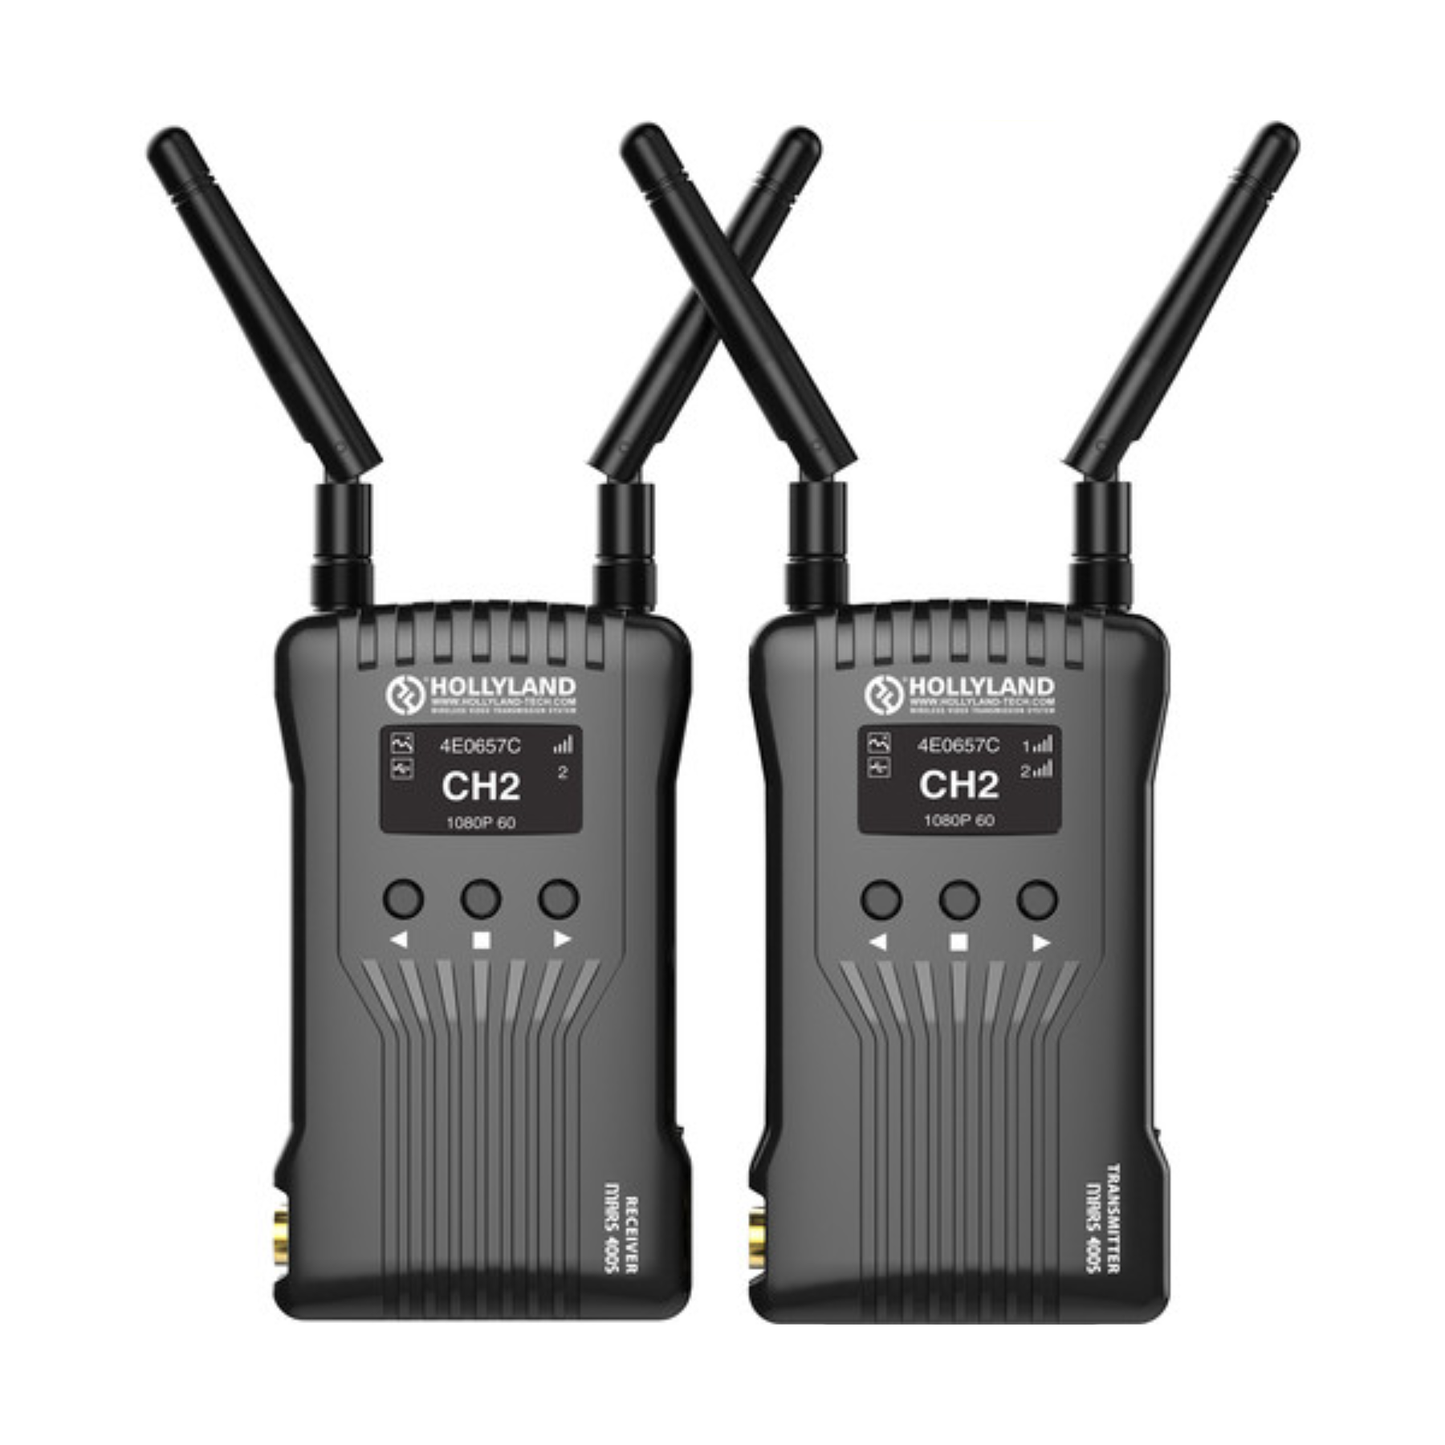 Hollyland wireless Video Transmitter for hire